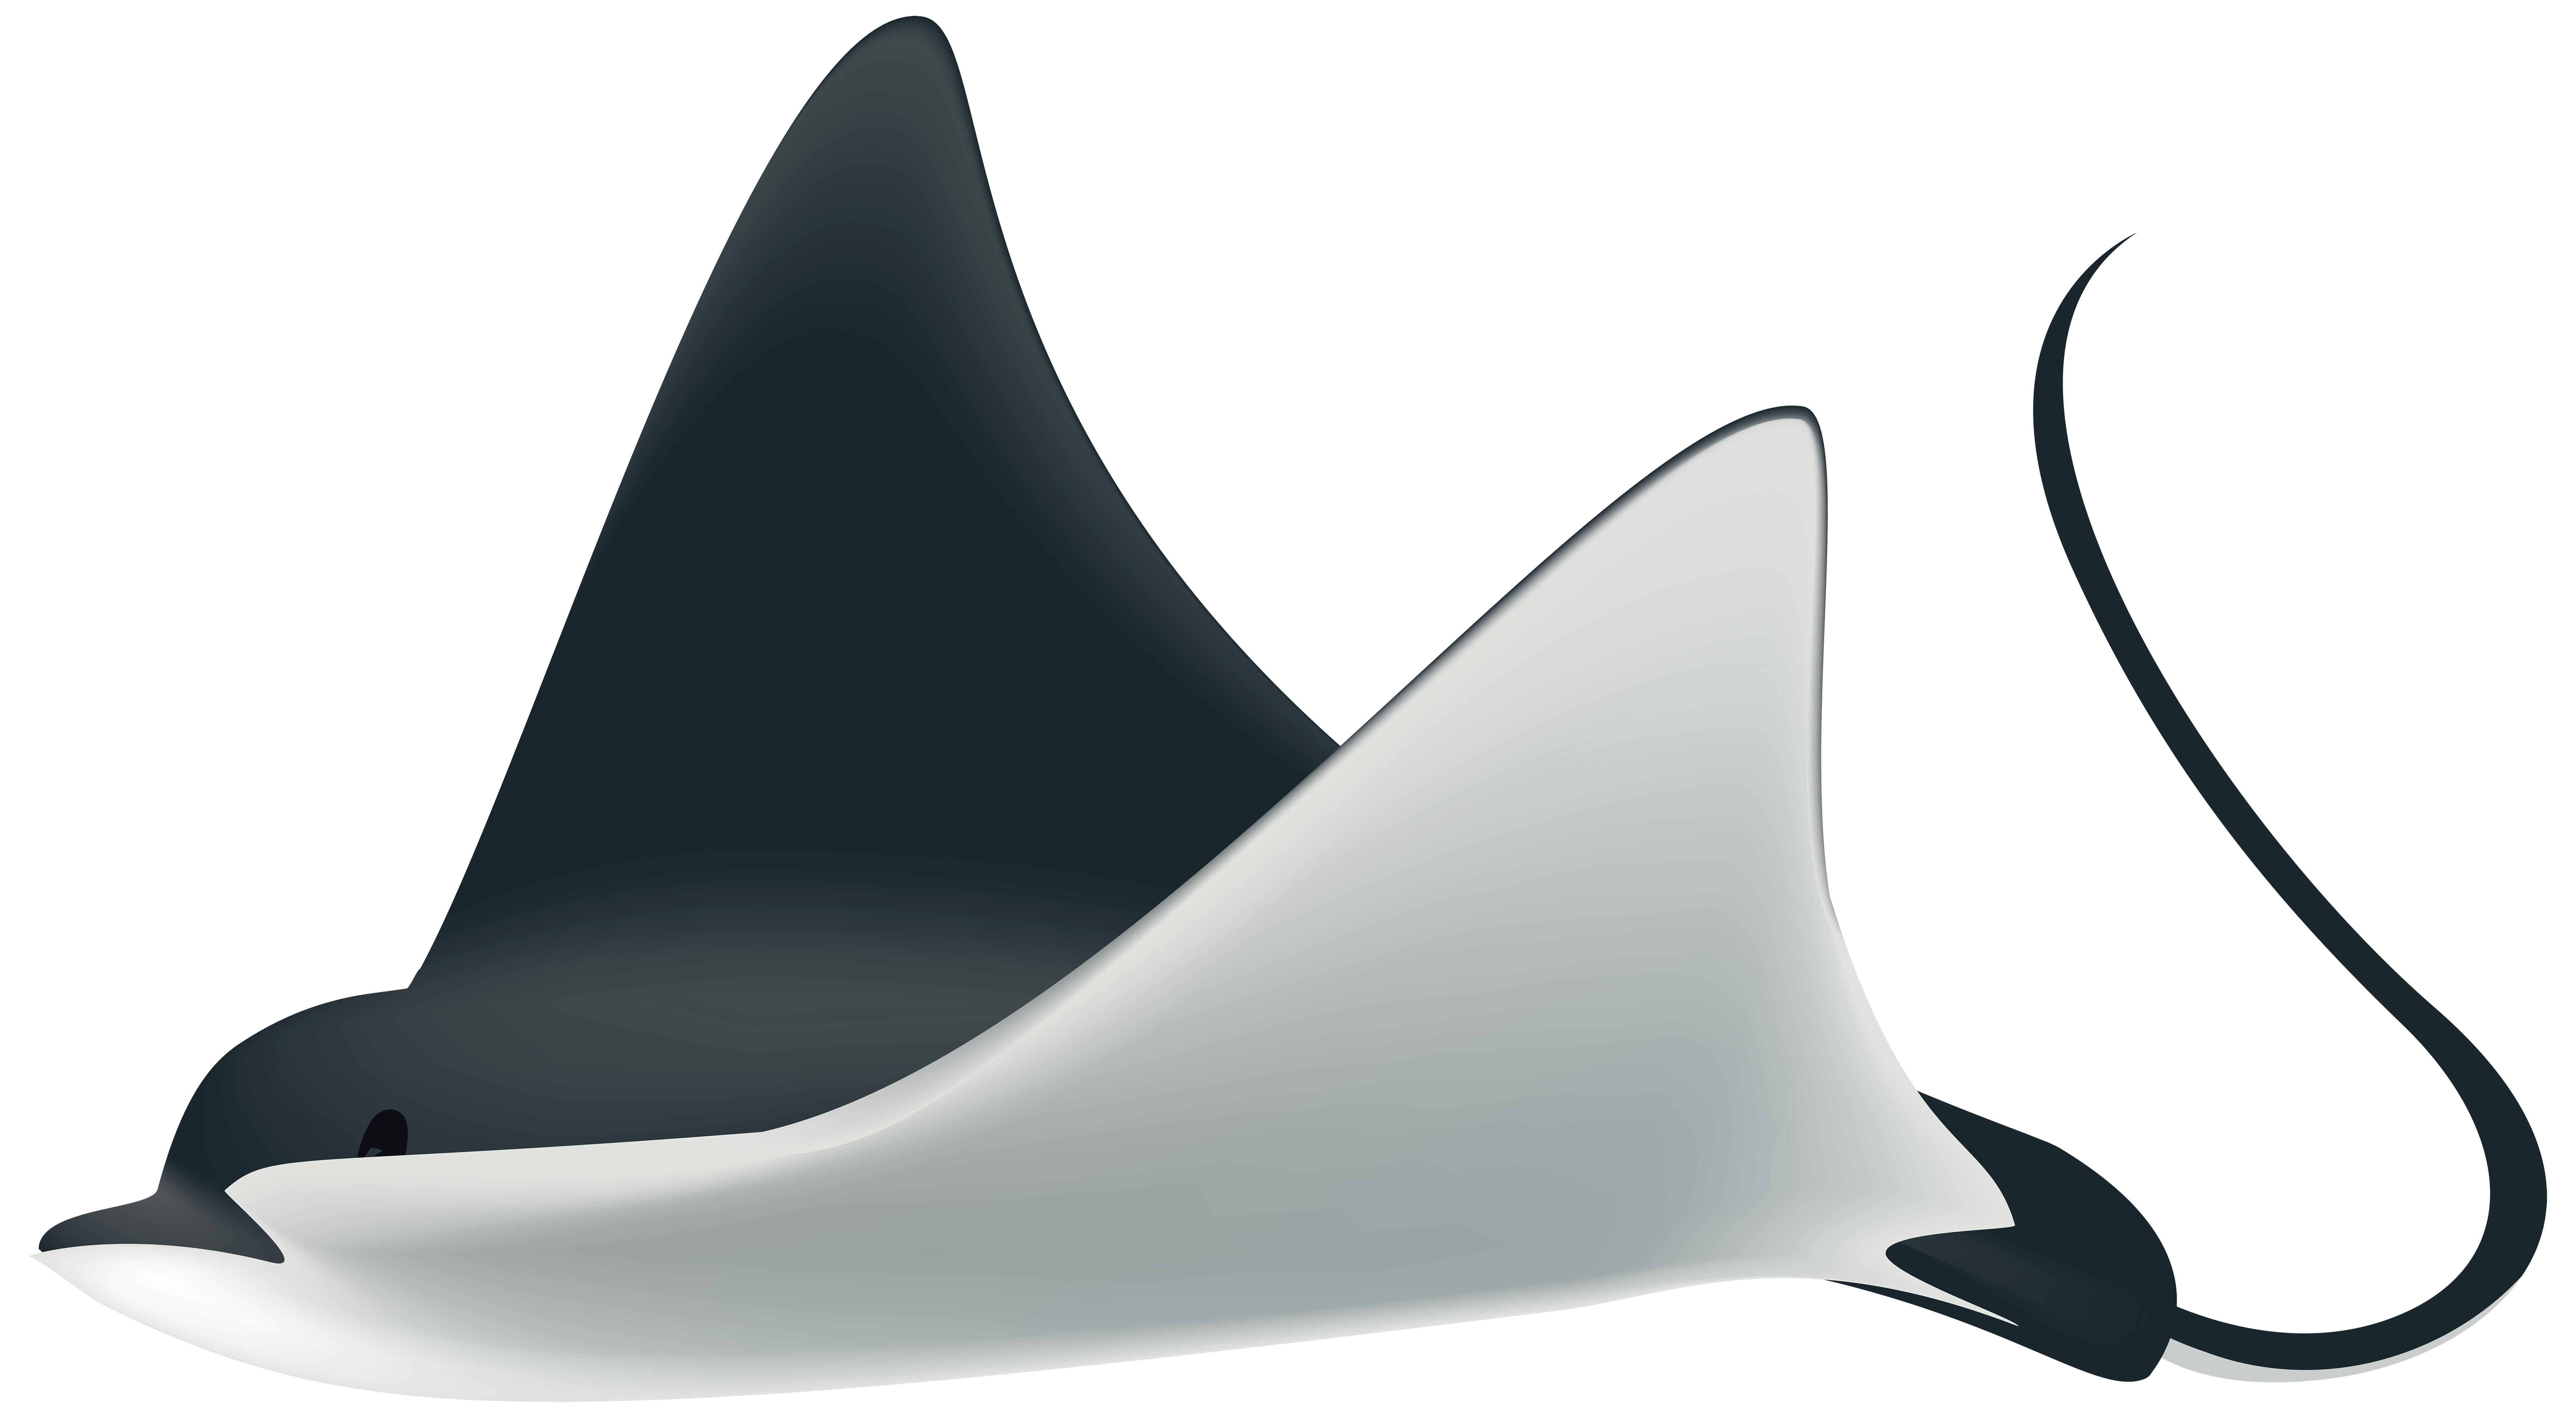 For kids at getdrawings. Water clipart shark